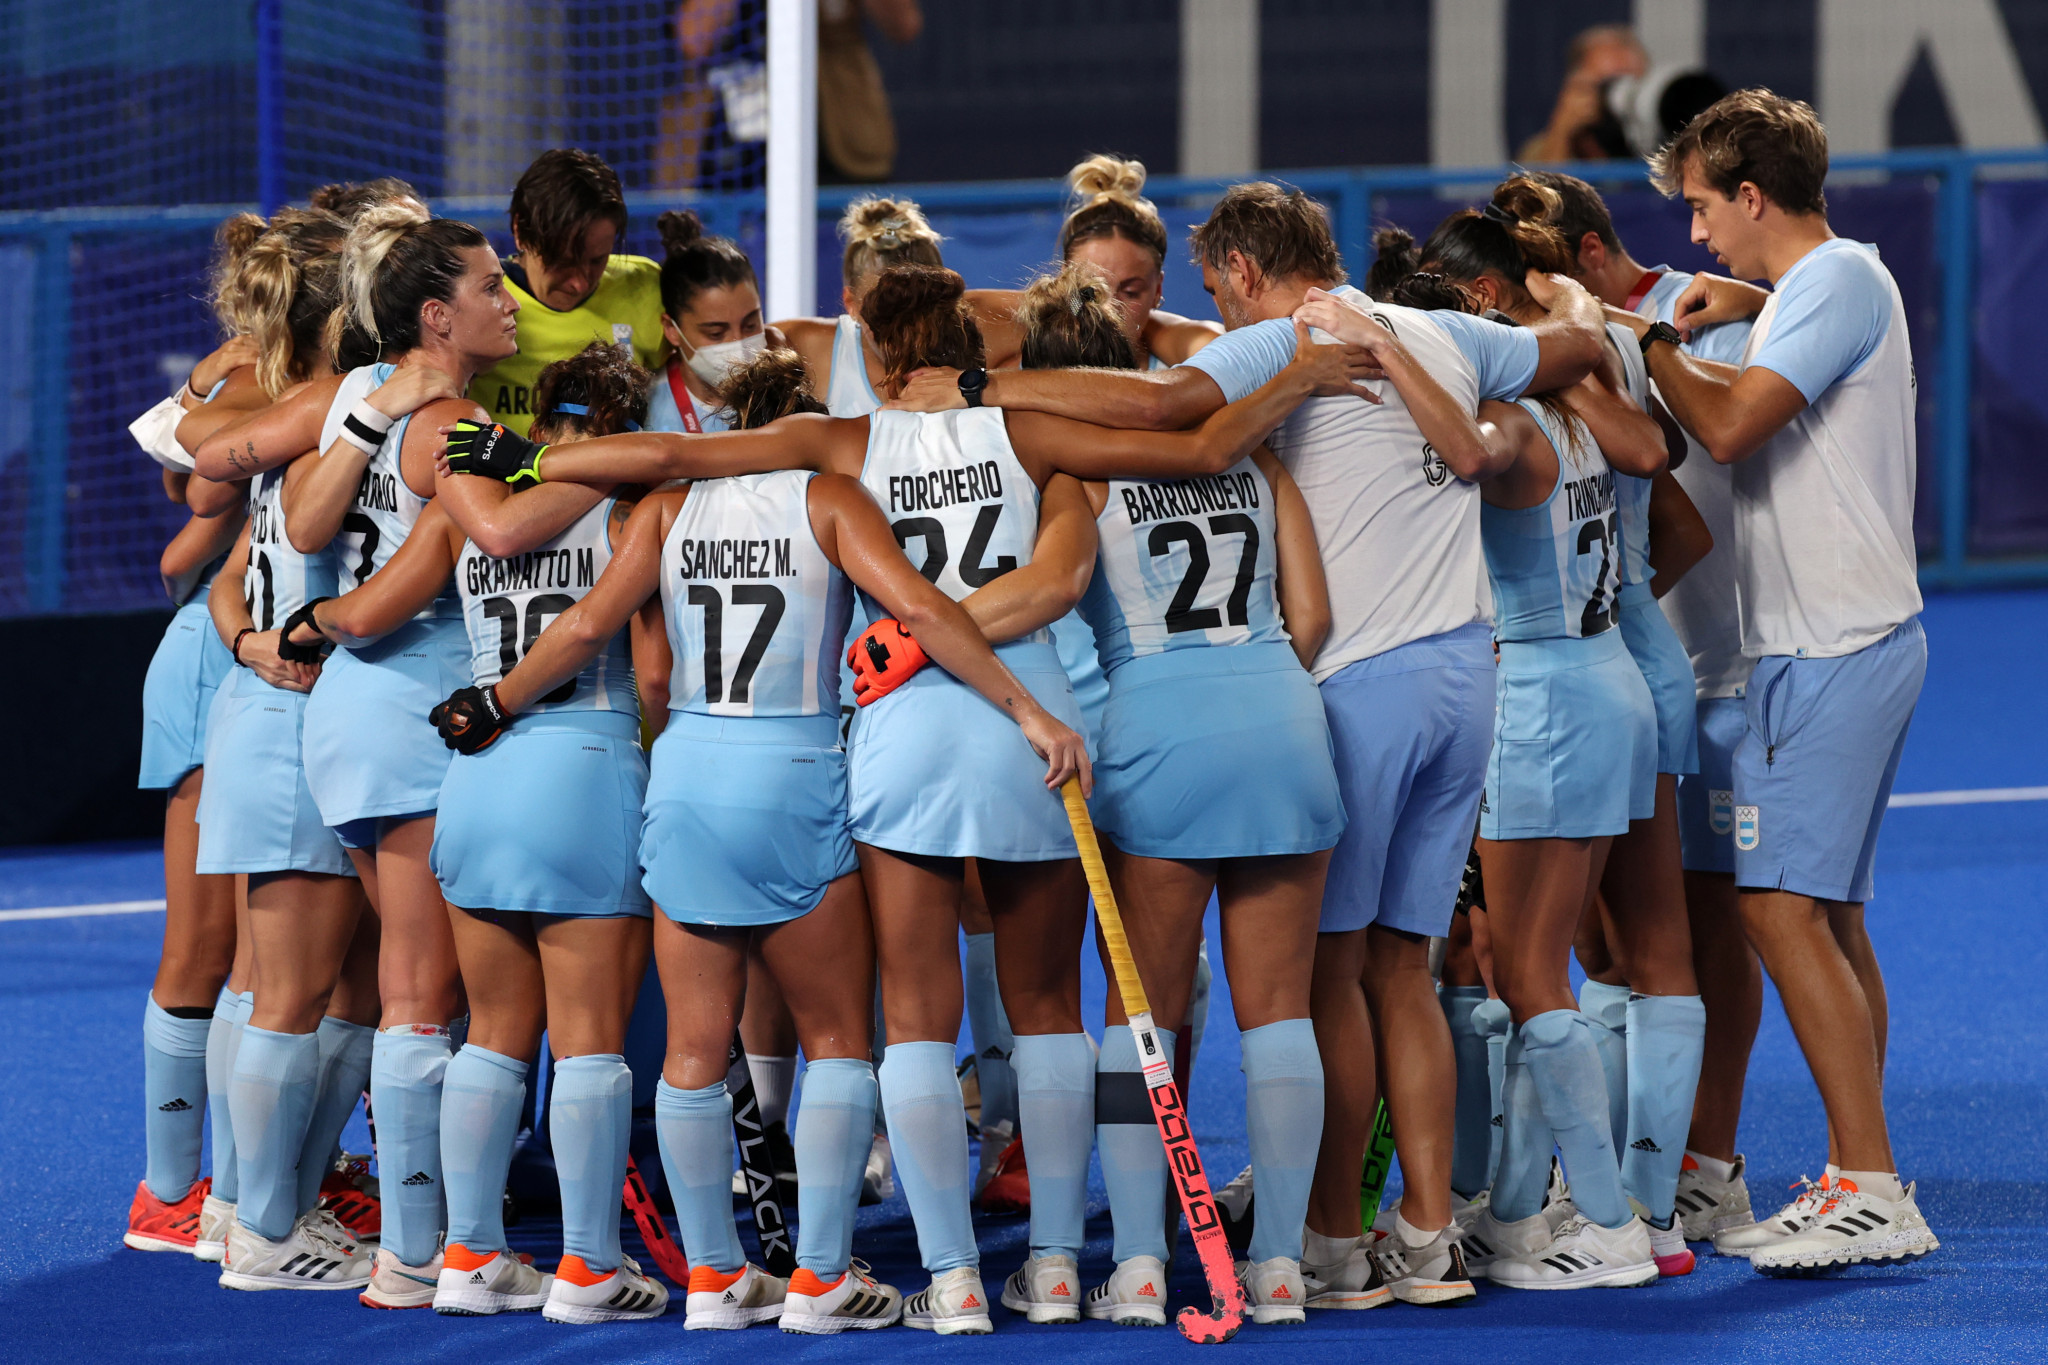 Argentina's women won a tenth straight FIH Pro League match this season with a 3-1 victory over China today ©Getty Images